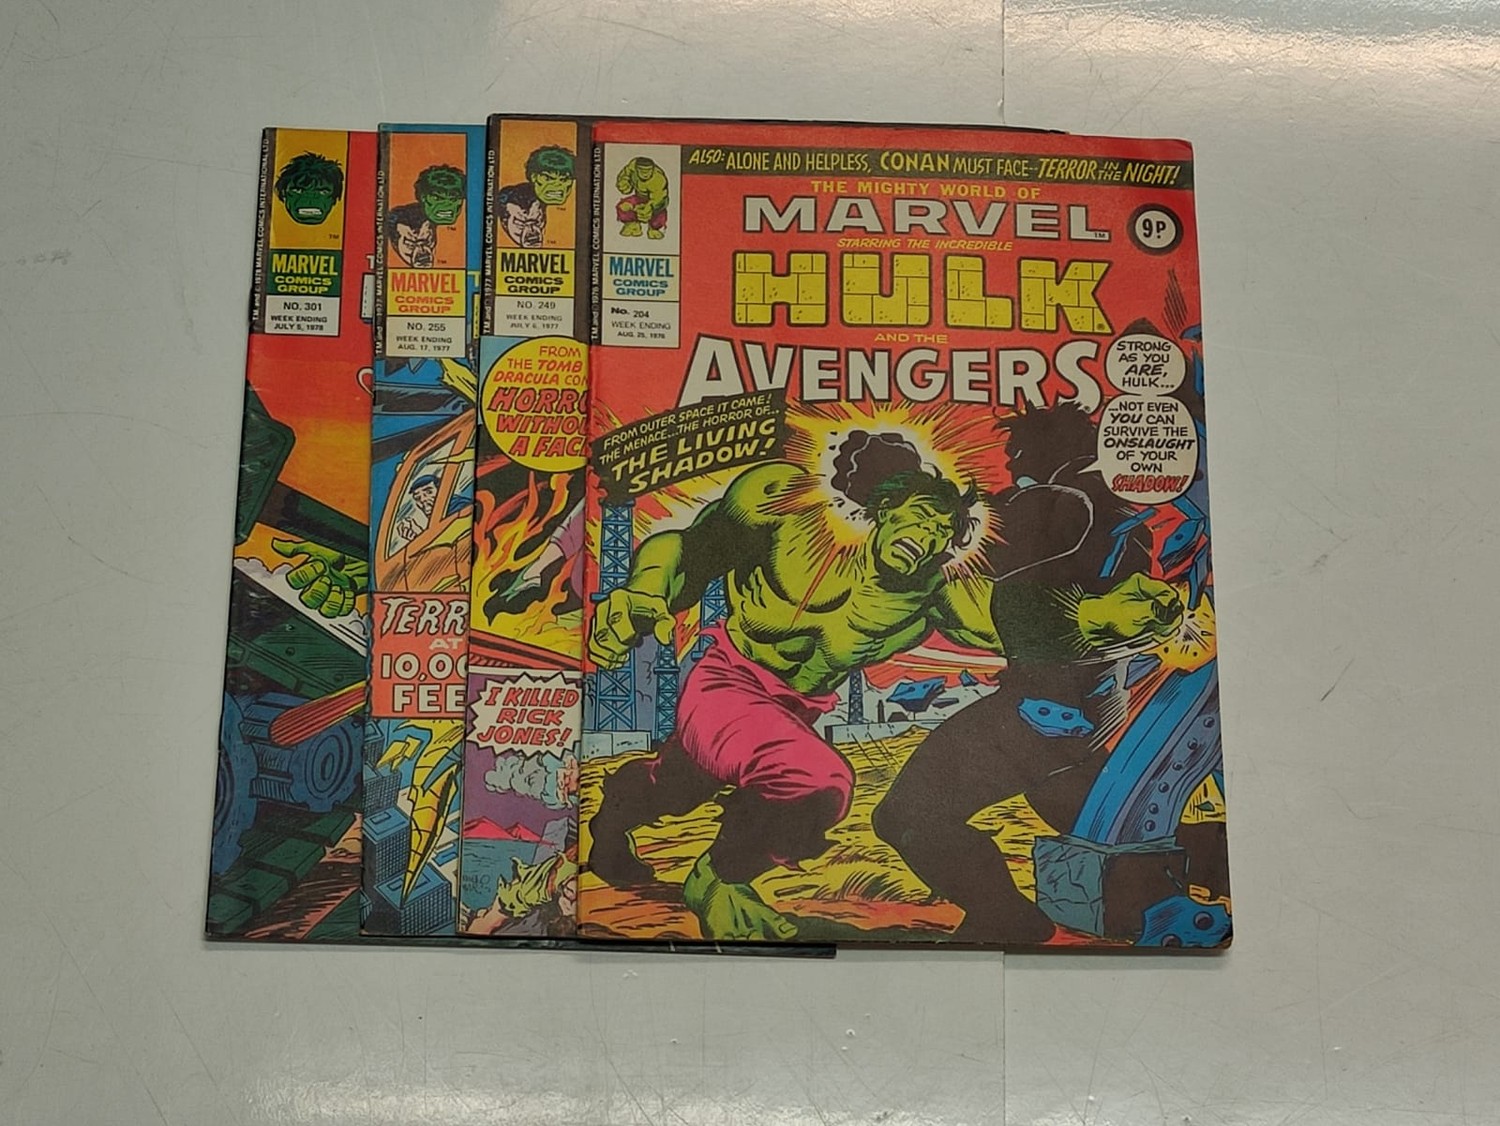 4 x Marvel comics. The Mighty World of Marvel Starring the Incredible Hulk. Dating from 1976 - 1978. - Image 2 of 6